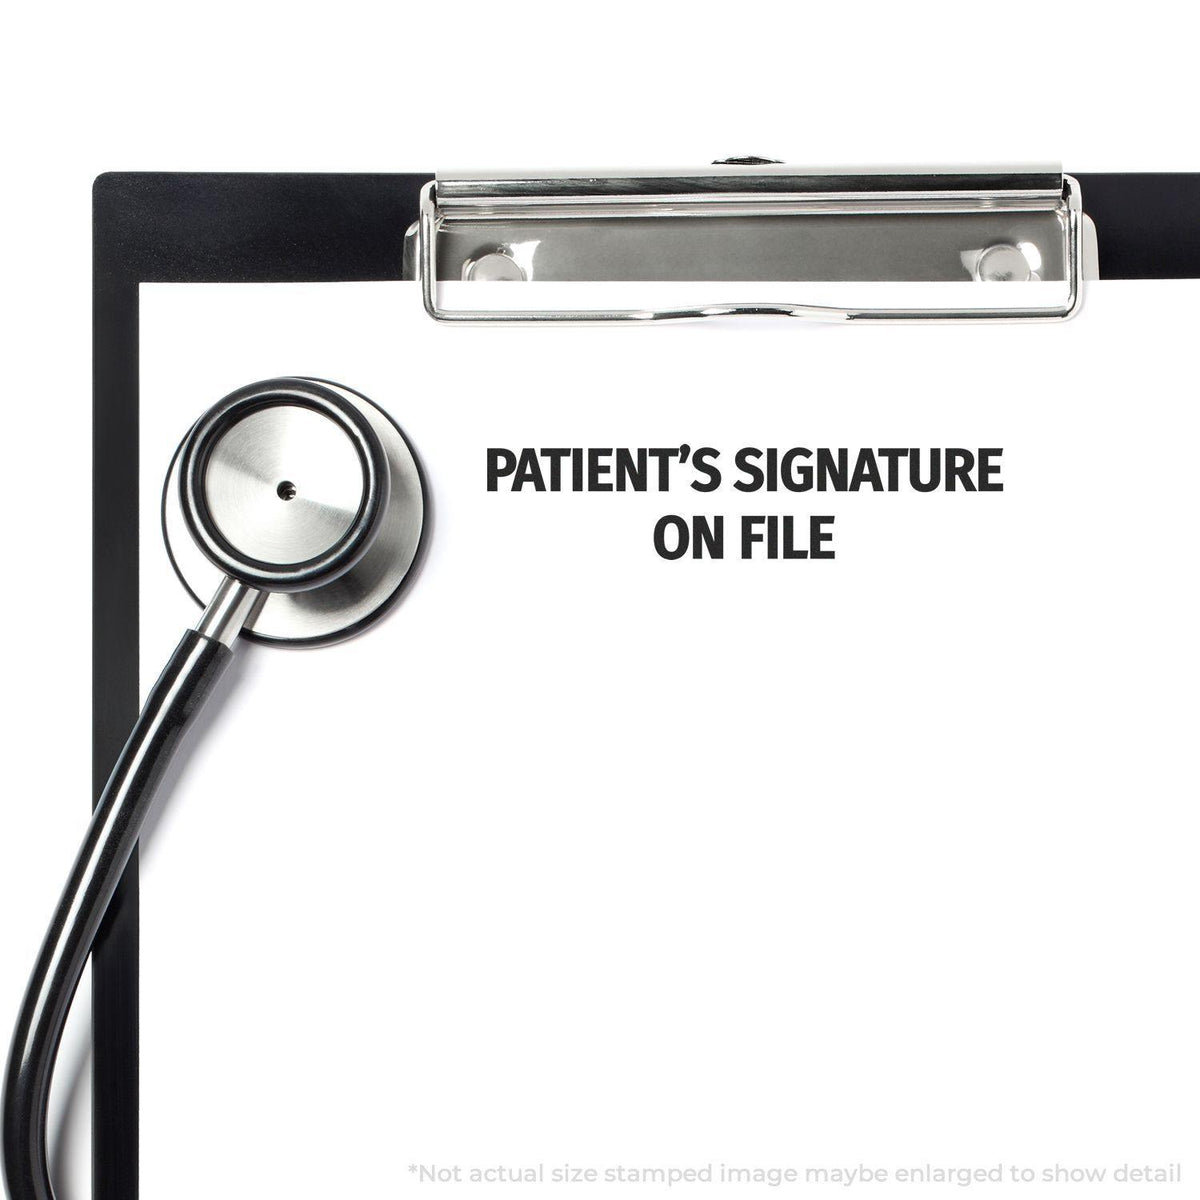 Large Patients Signature on File Rubber Stamp In Use Photo